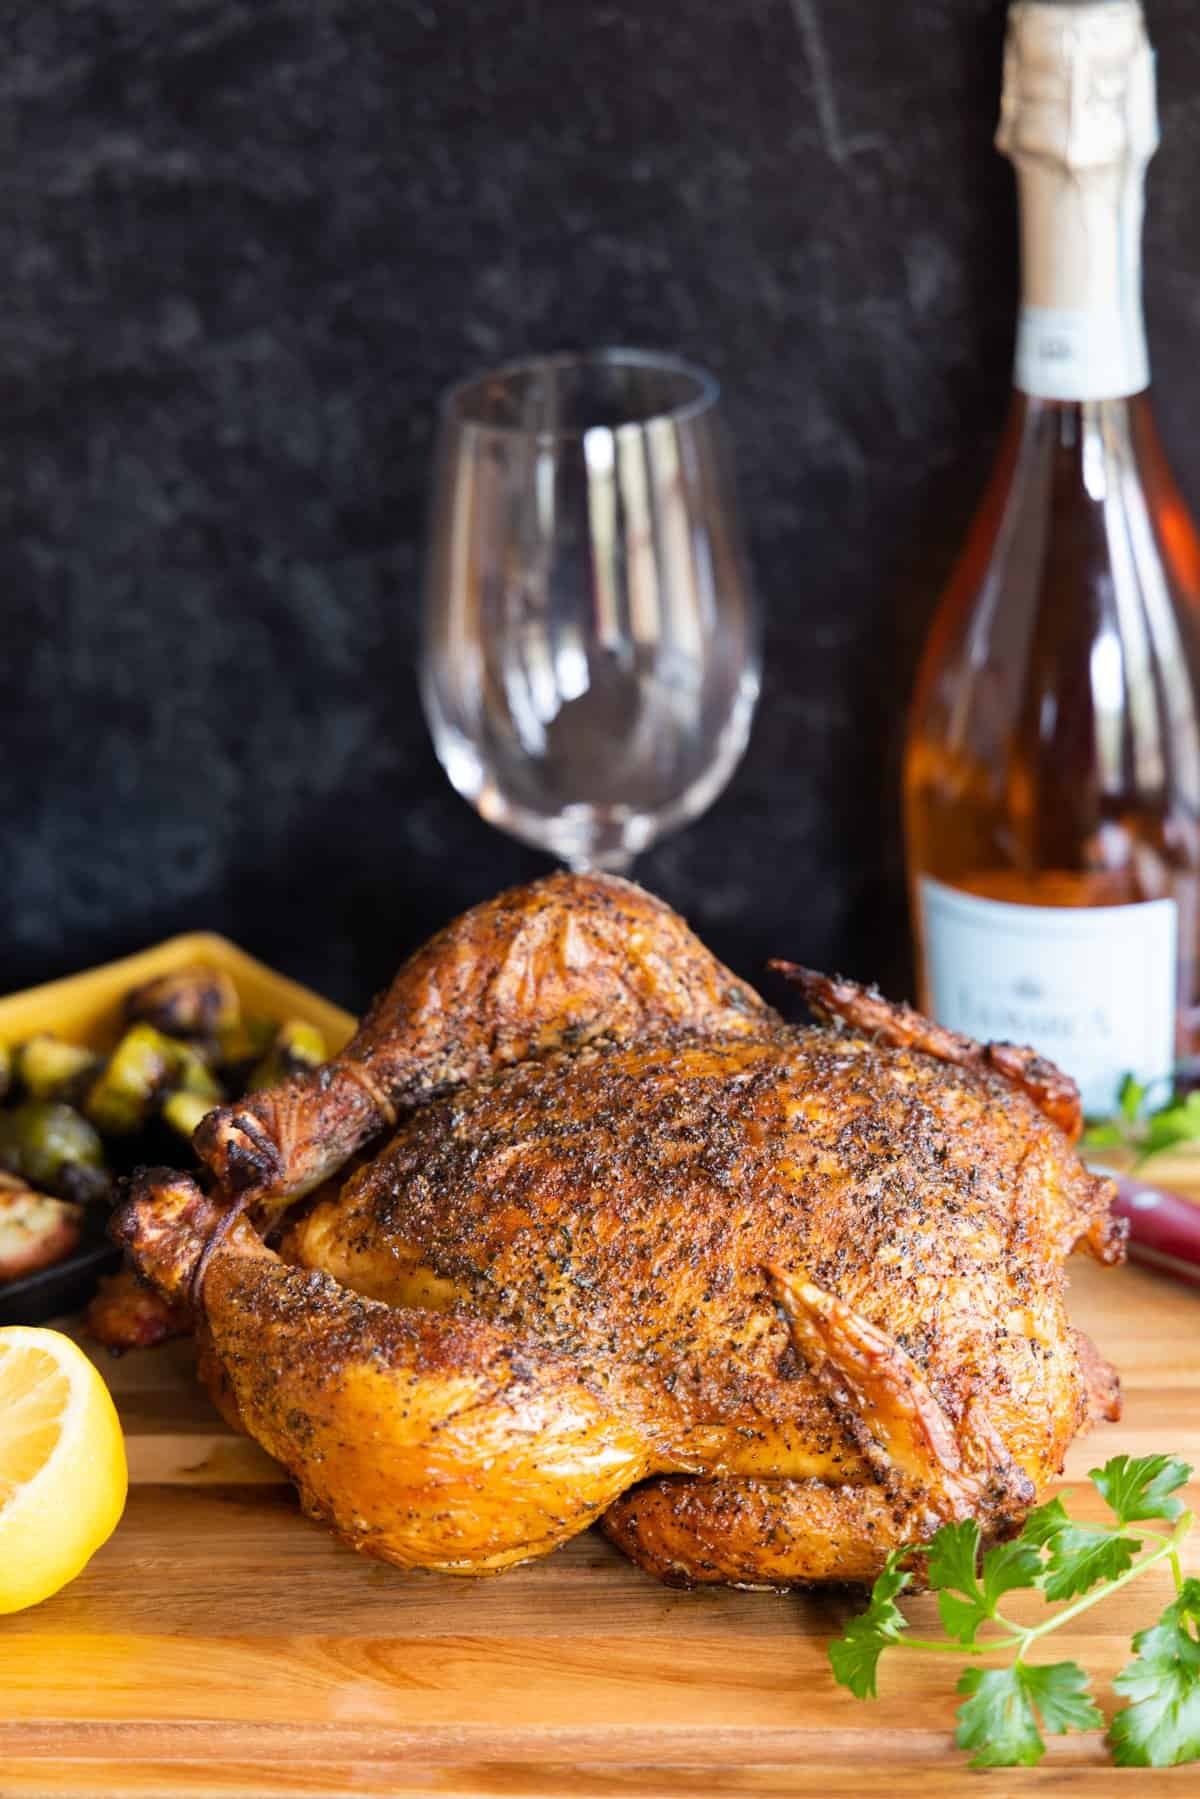 Smoked chicken on cutting board with lemons and parsley with wine bottle and glass in background